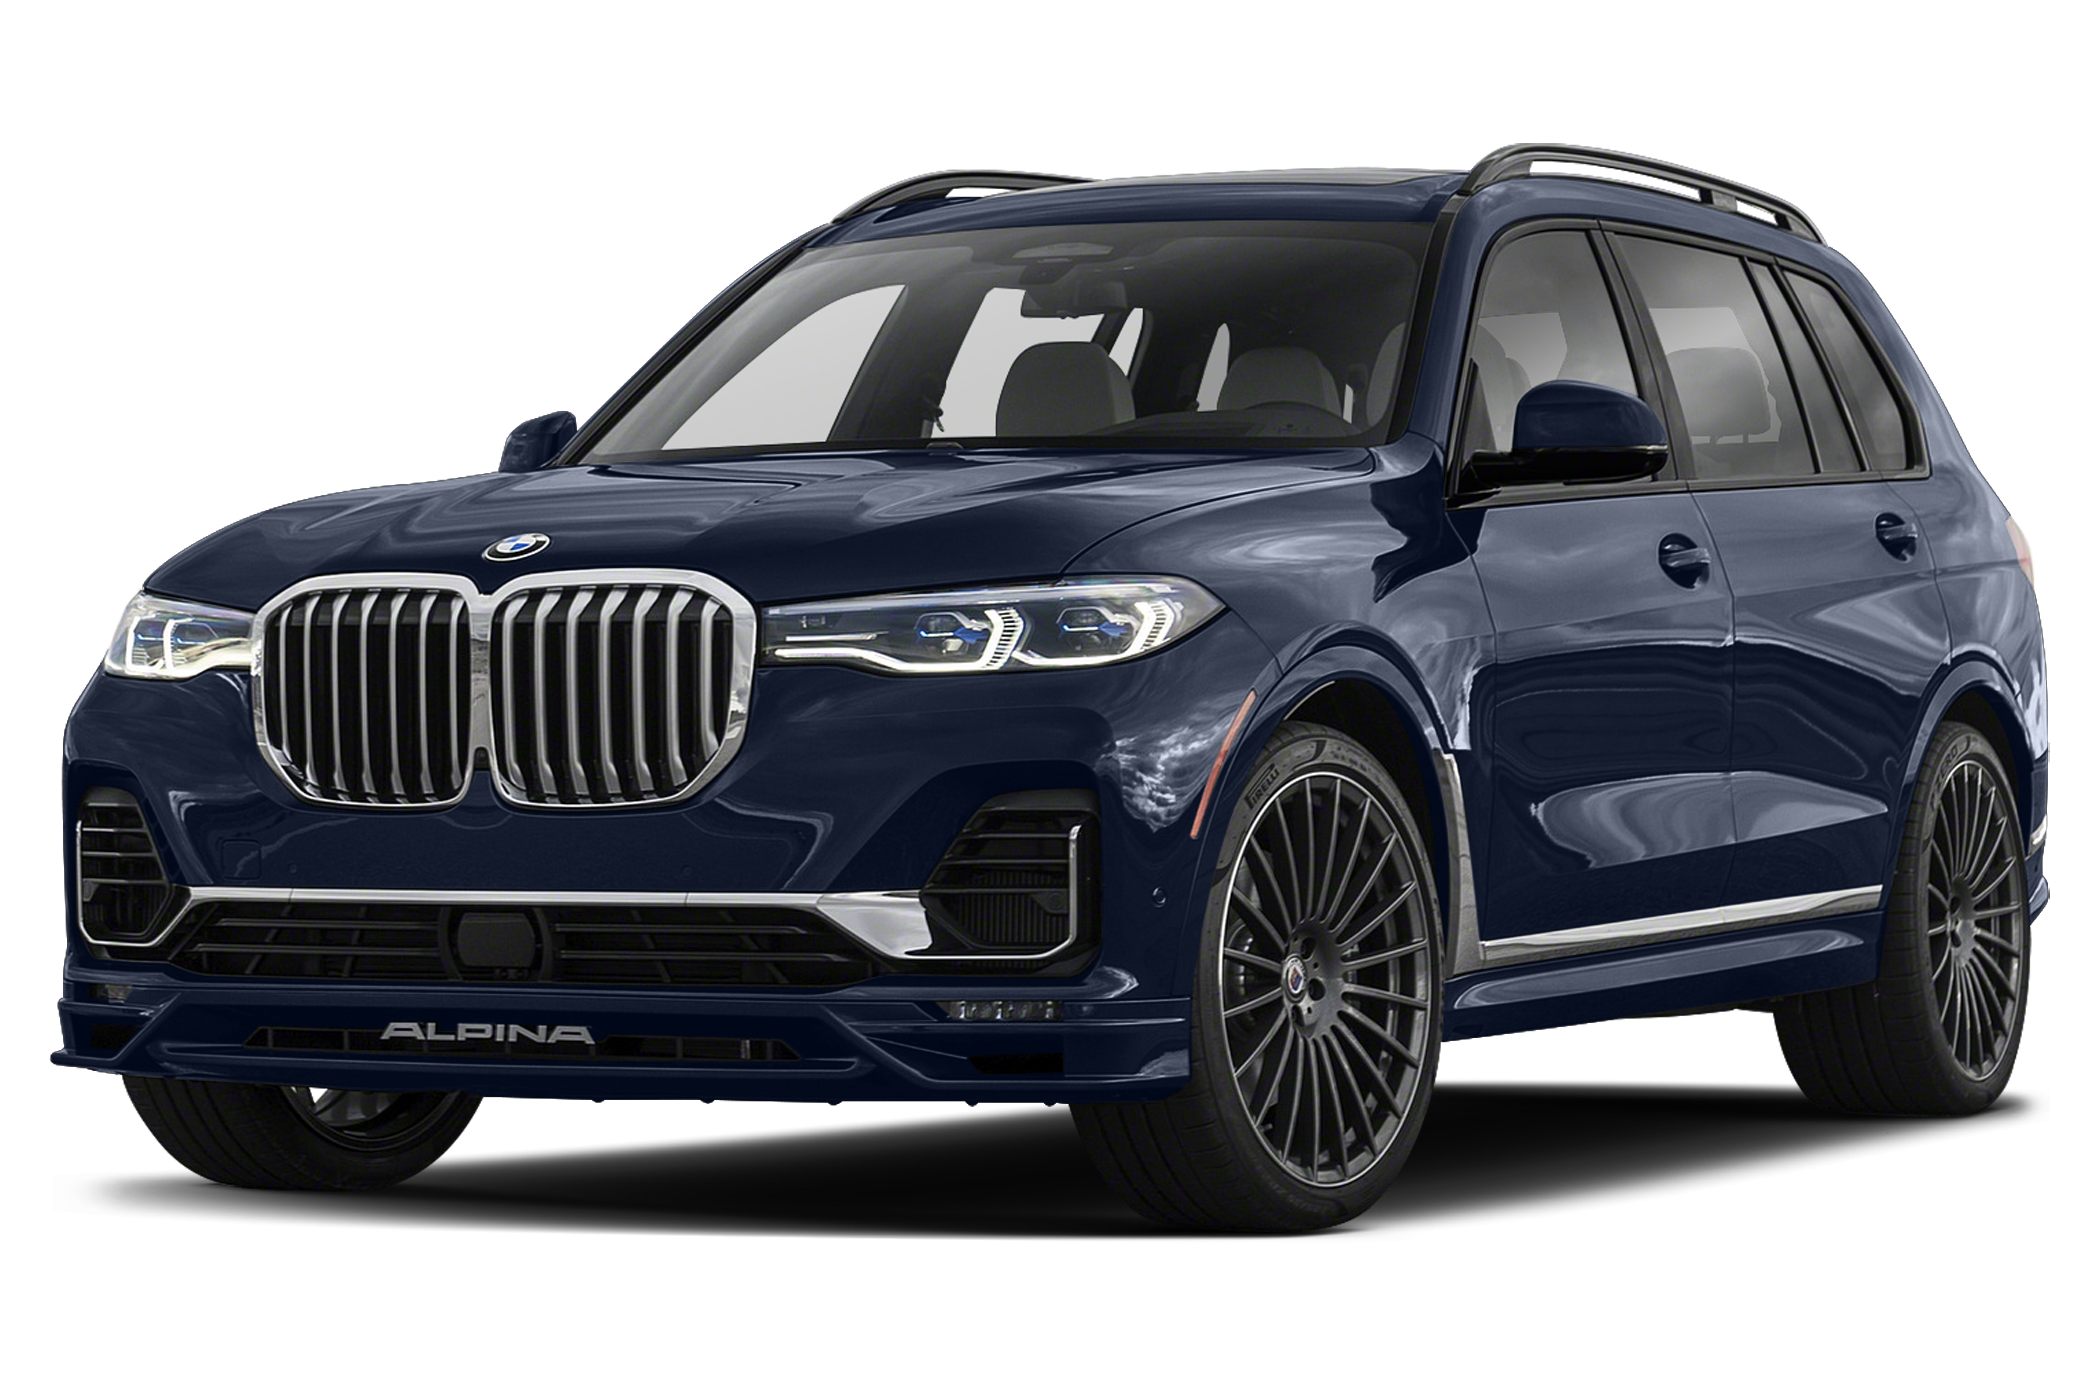 2021 Bmw Alpina Xb7 Base 4dr All Wheel Drive Sports Activity Vehicle Specs And Prices